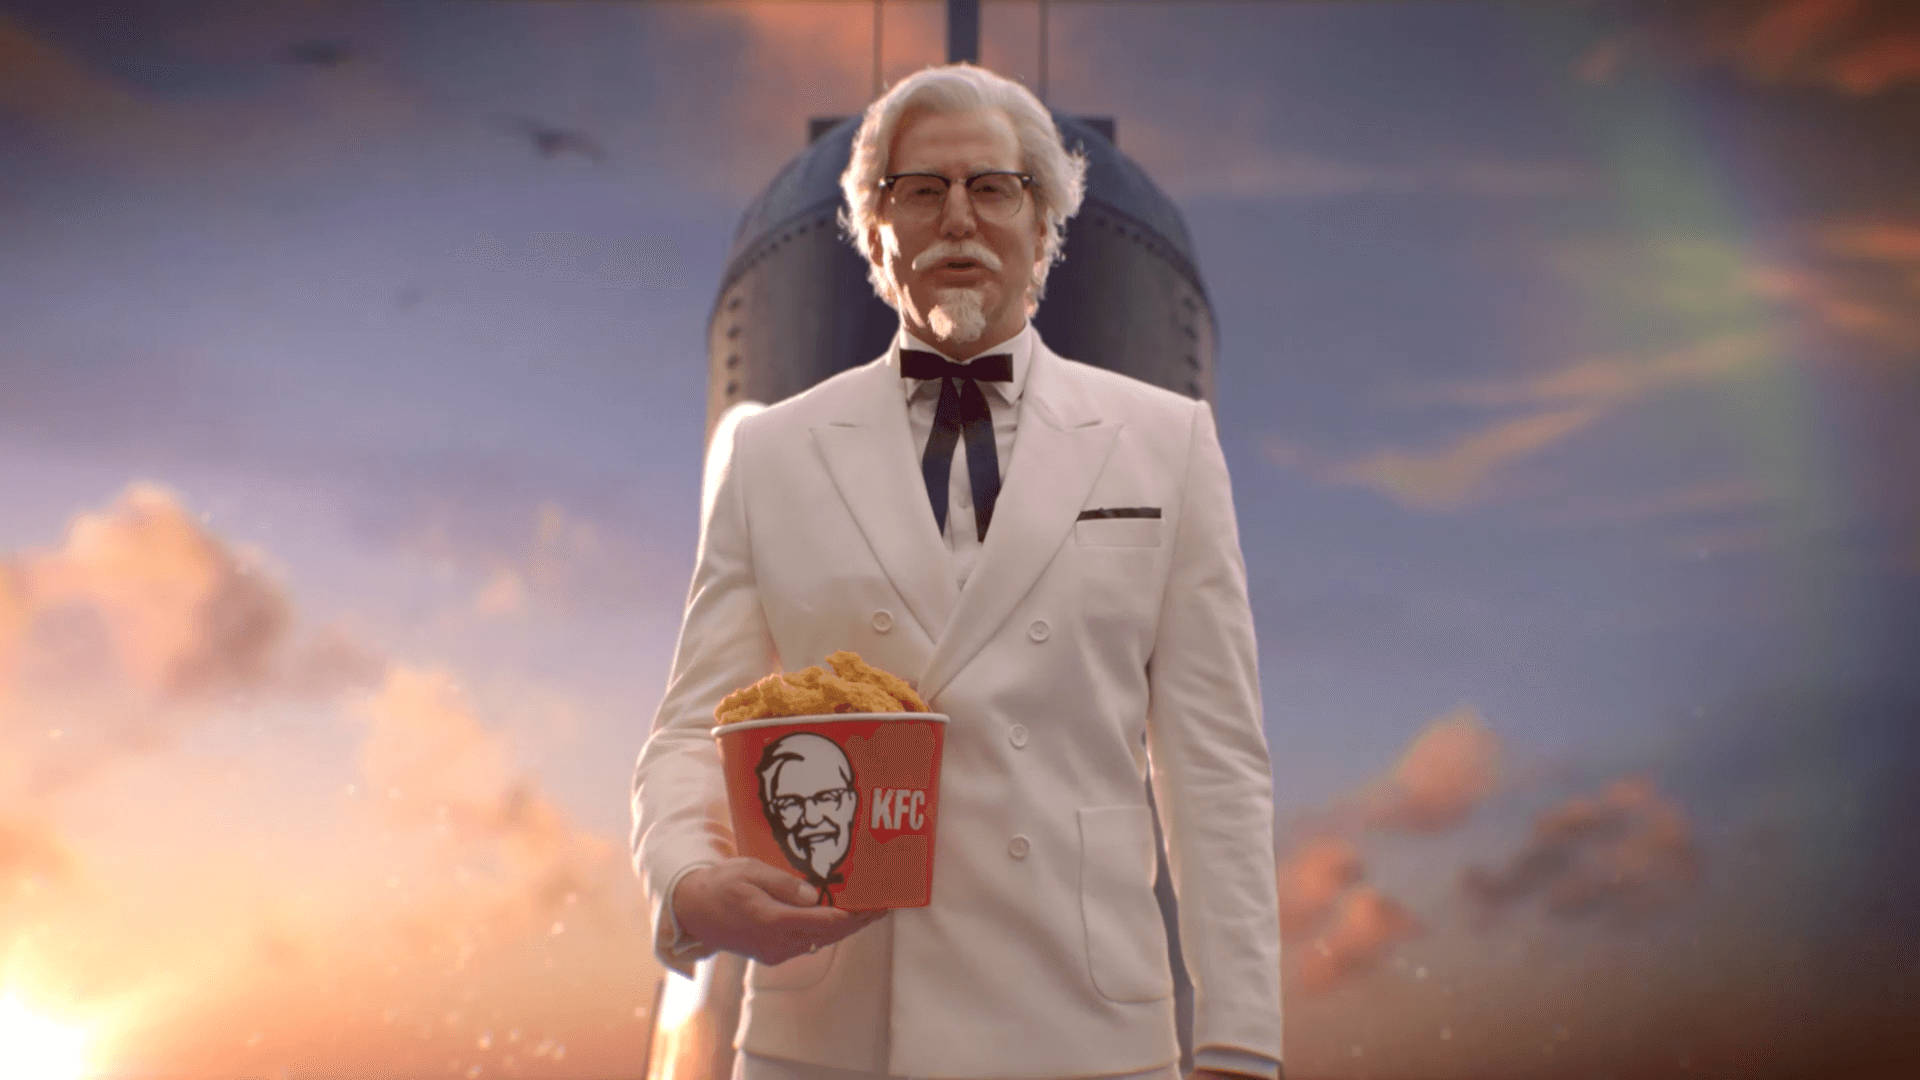 Kfc Rob Riggle As Colonel Background